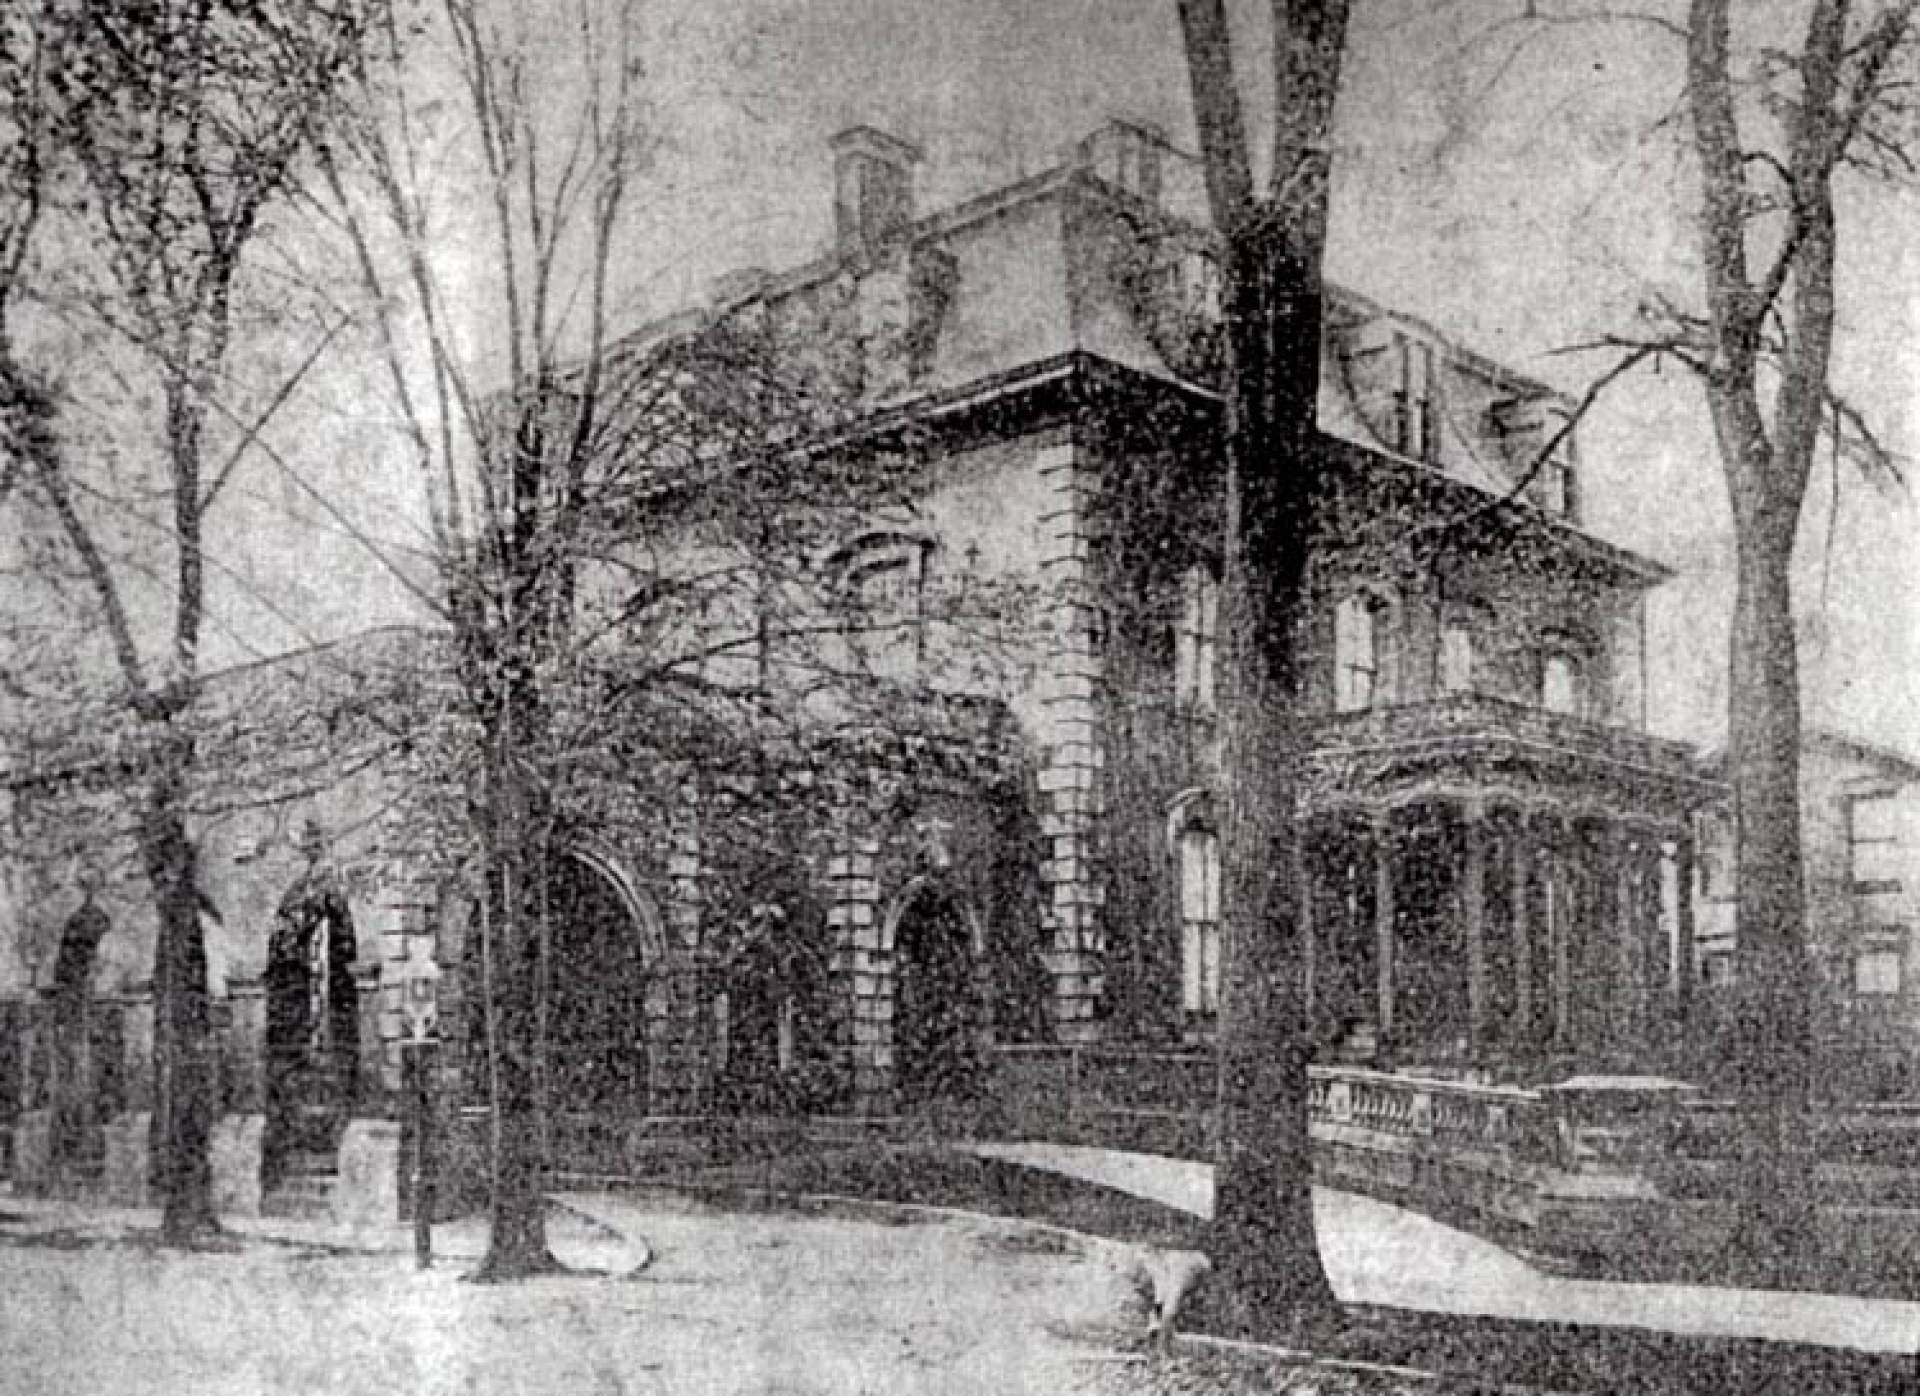 The Neighborhood of Charles Cary Rumsey from Mary Beth Parrinello